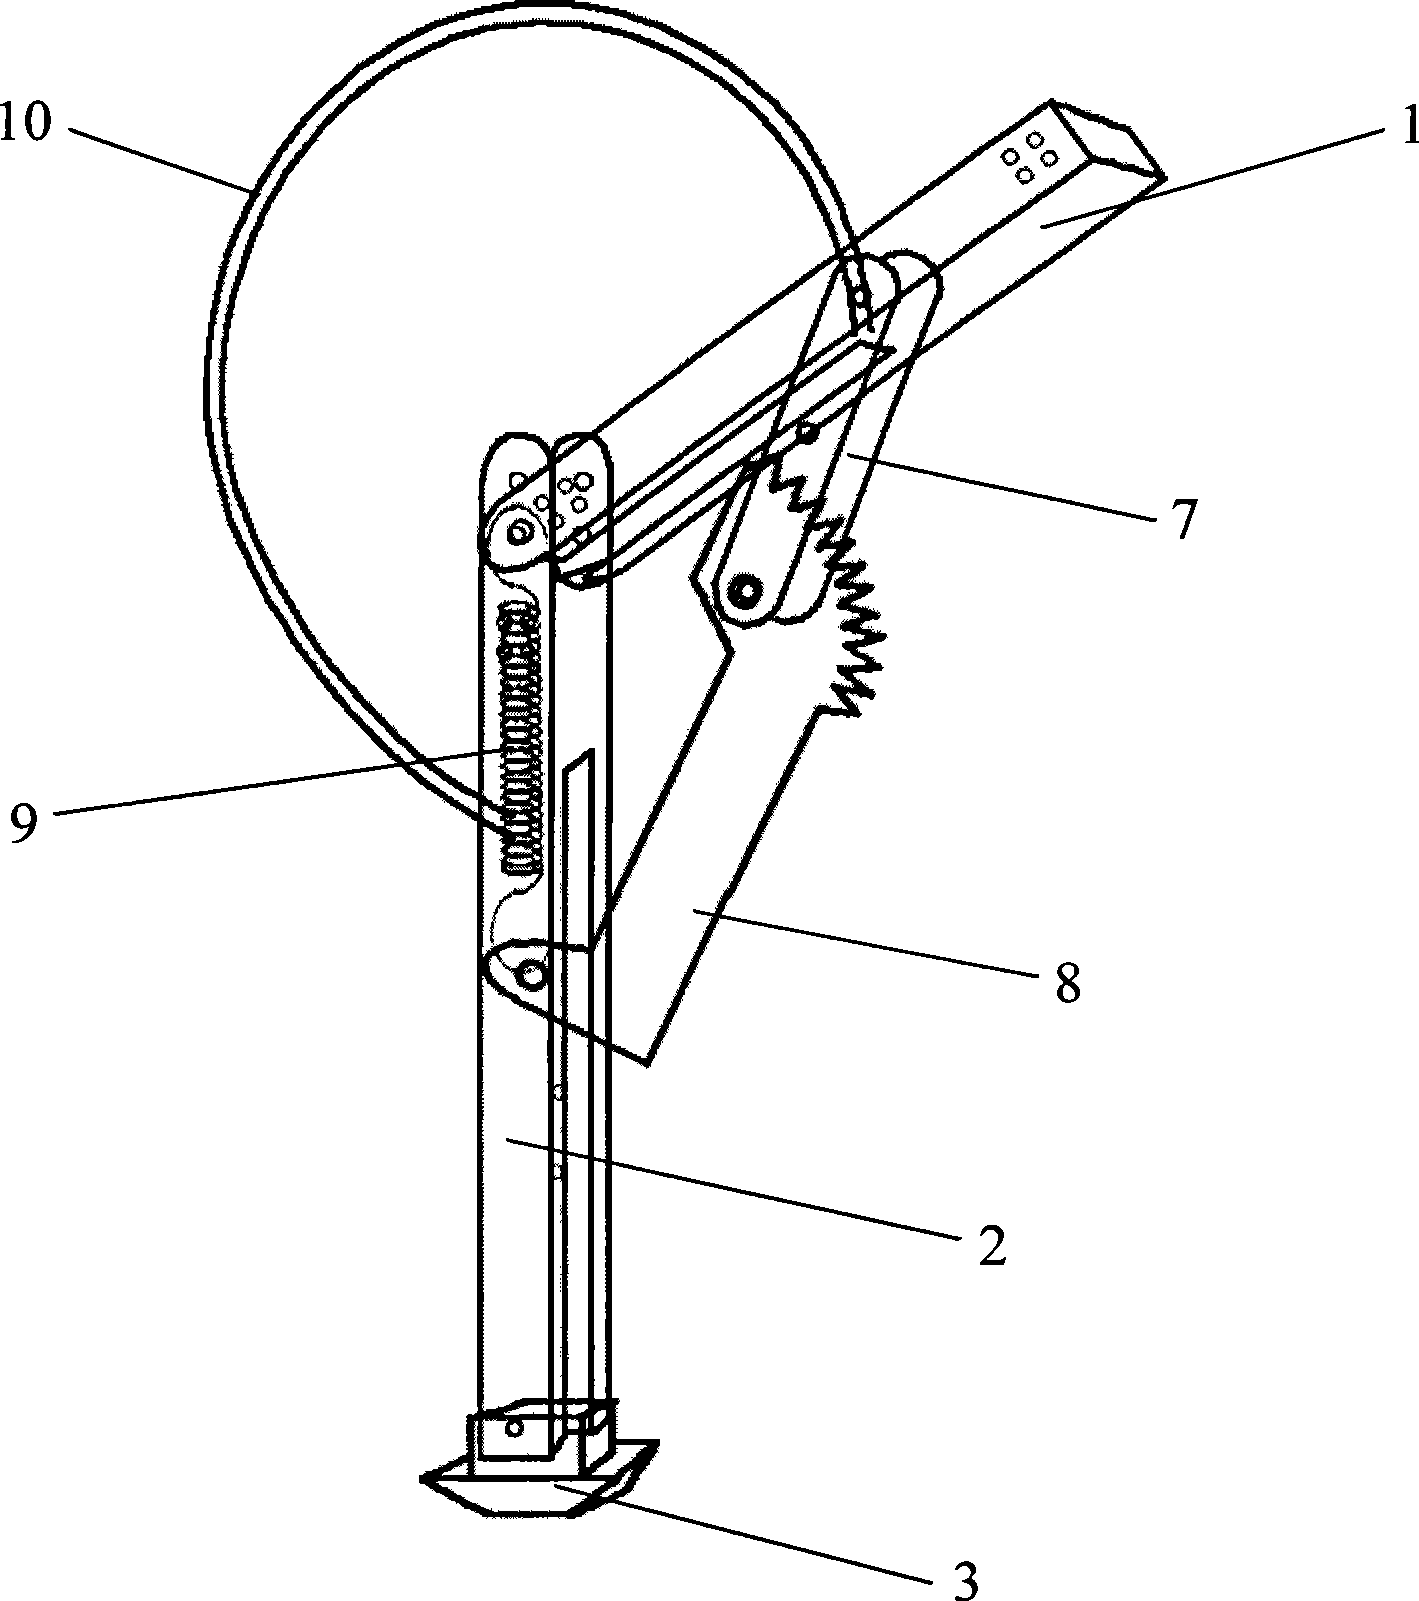 Mechanical leg for assisting running and jumping